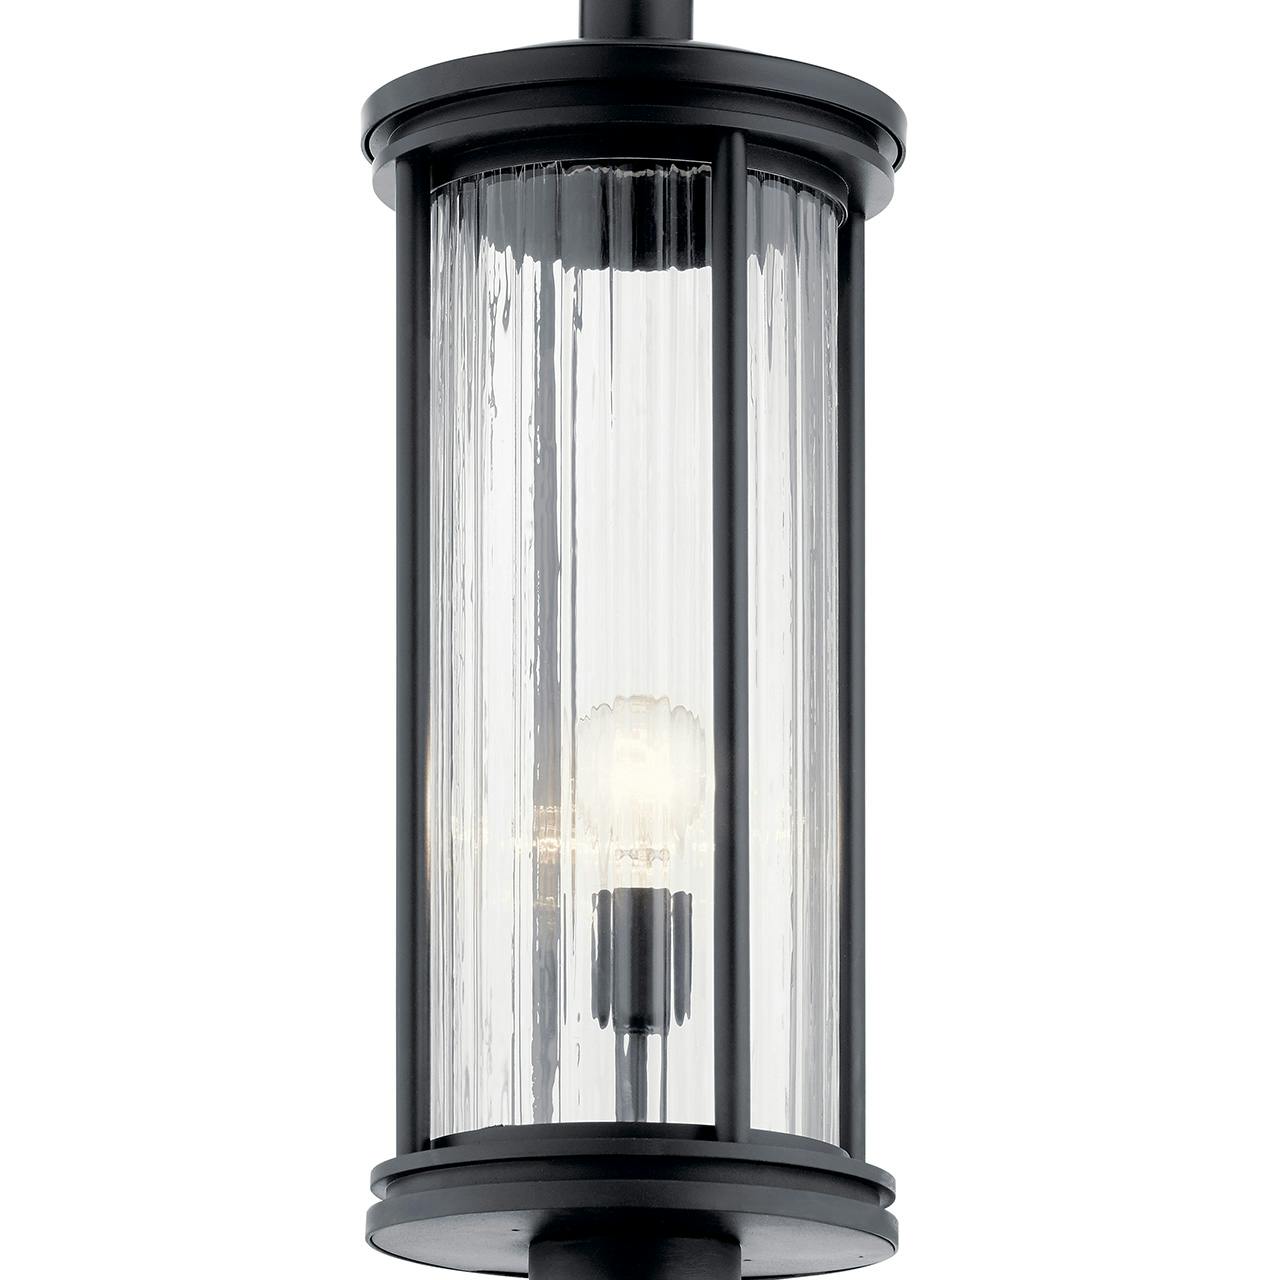 Close up view of the Barras 23.25" 1 Light Post Light Black on a white background